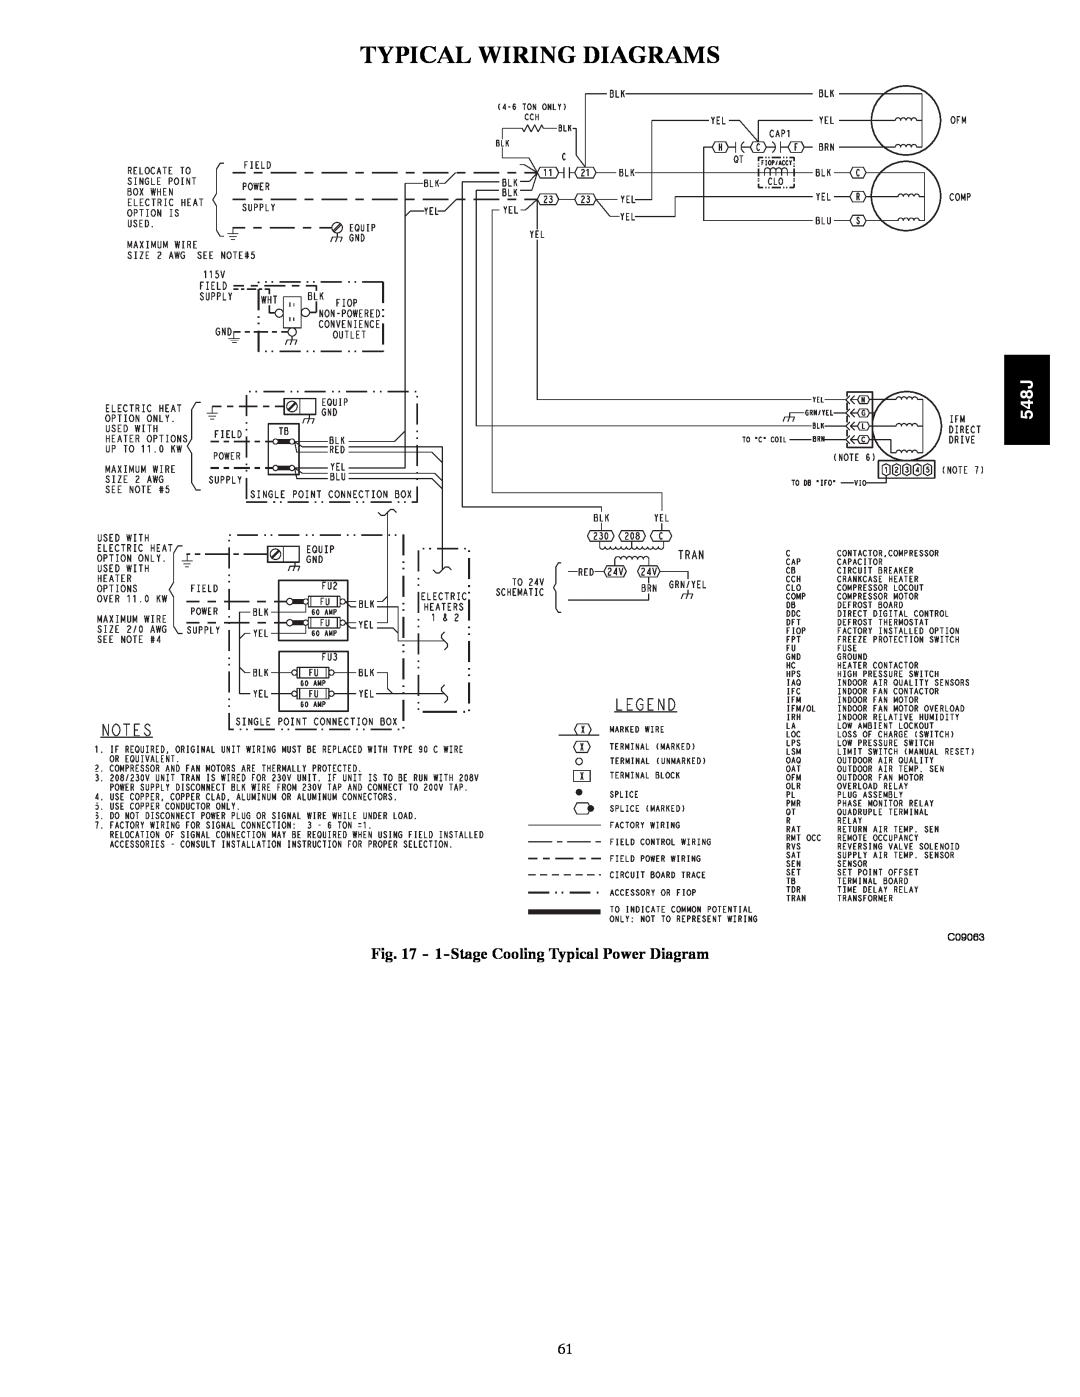 Bryant 548J manual Typical Wiring Diagrams, 1-StageCooling Typical Power Diagram, C09063 